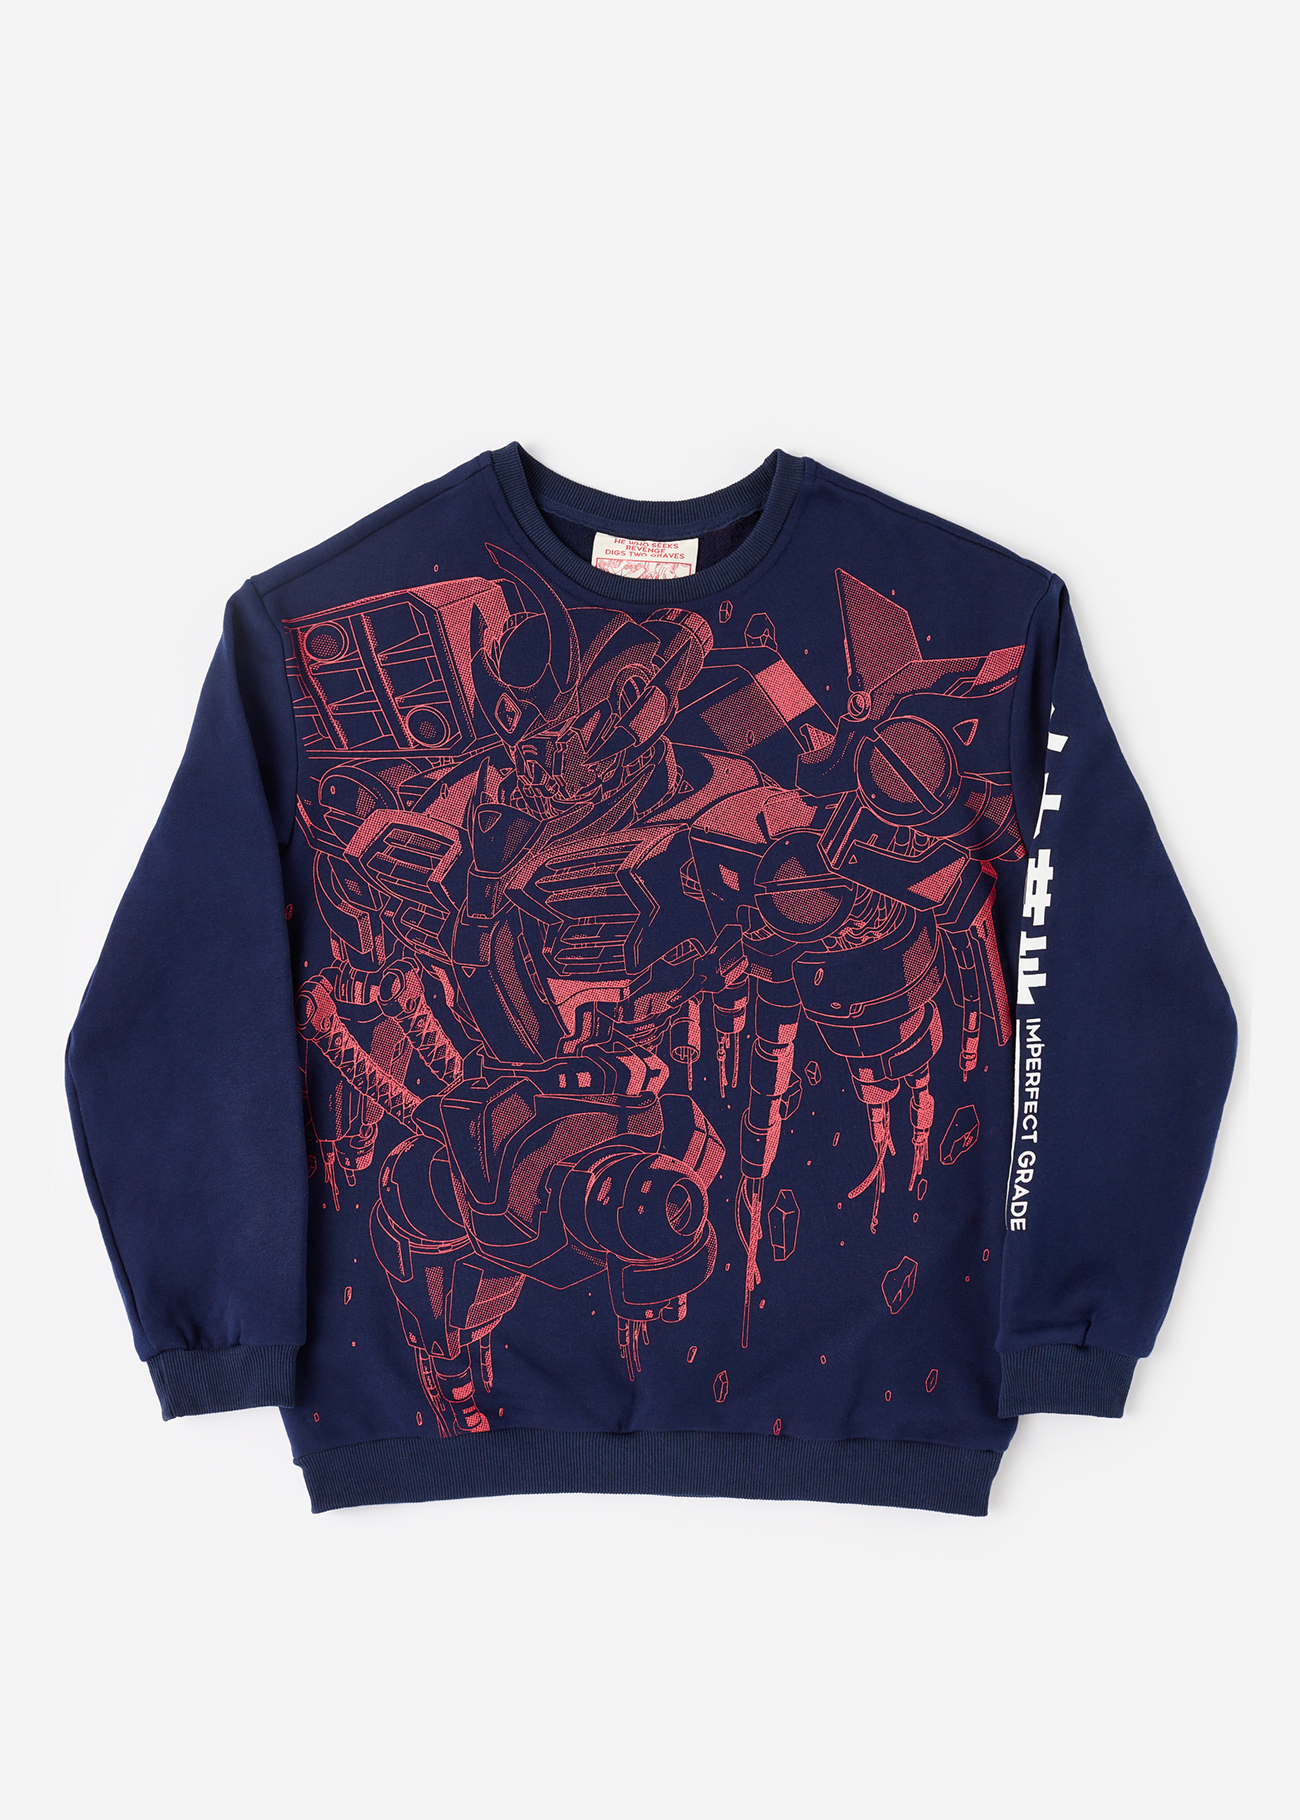 Front facing photo of an Anime-inspired blue sweater featuring a screen-printed mecha design on the front, styled for anime enthusiasts.